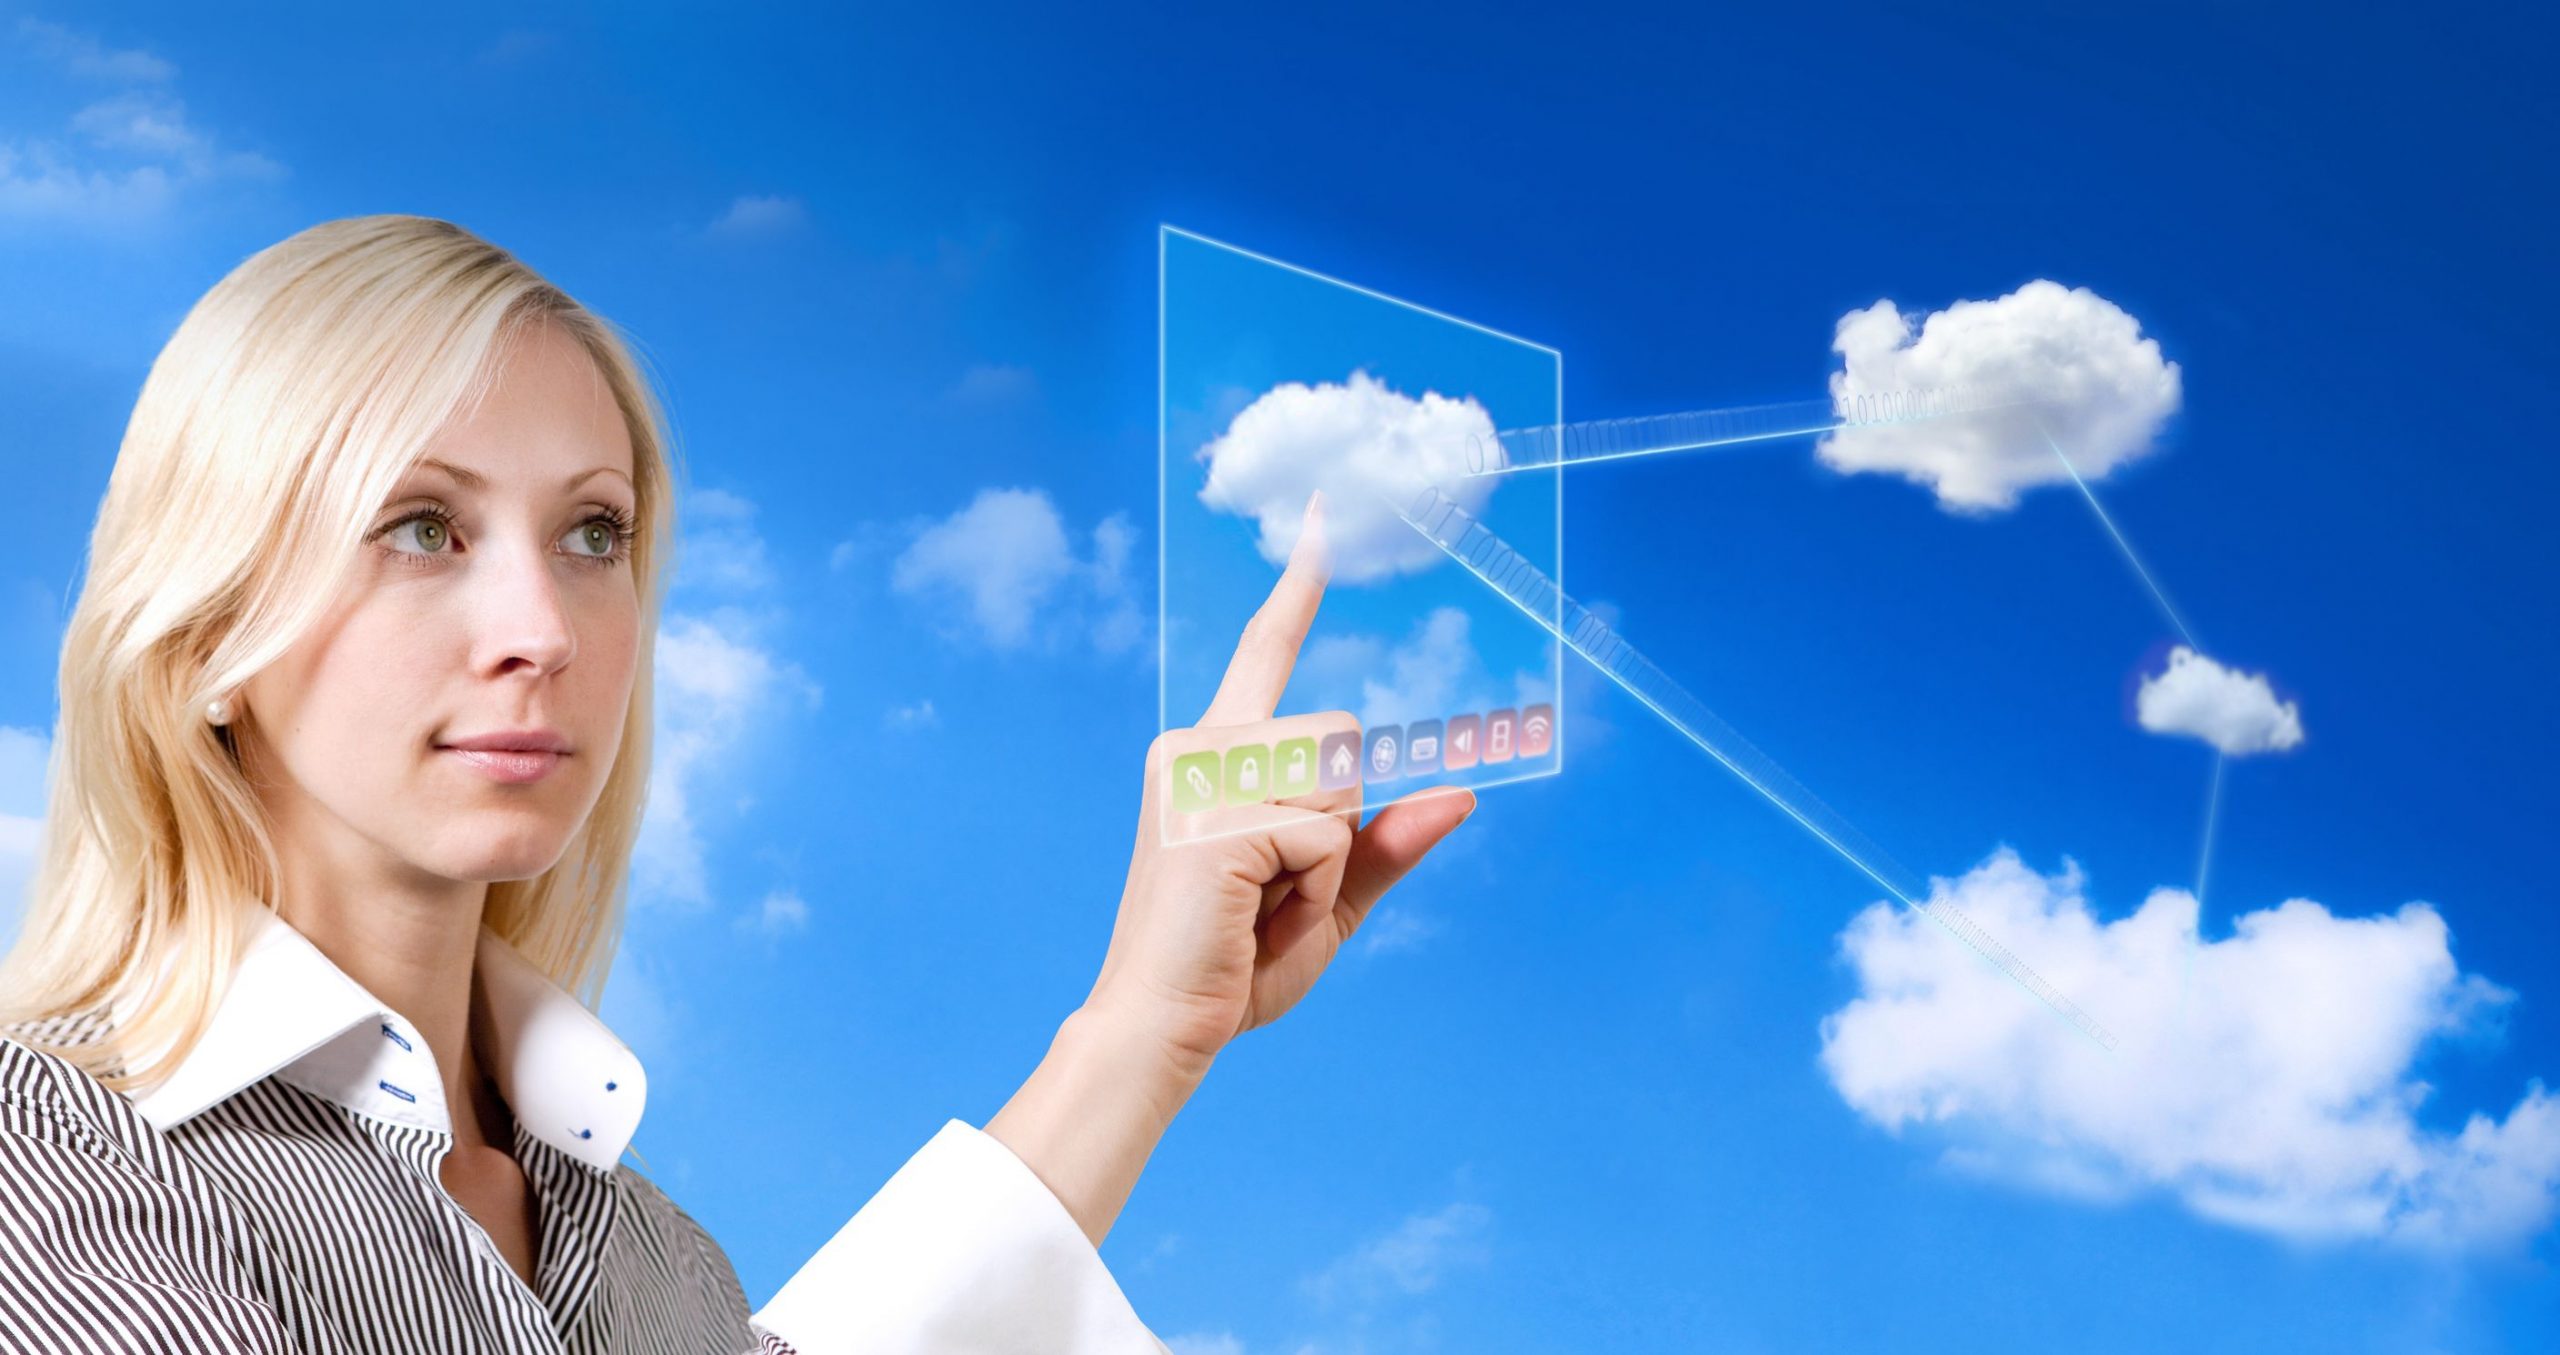 5 Critical Things To Confirm When Choosing A Cloud Storage Provider